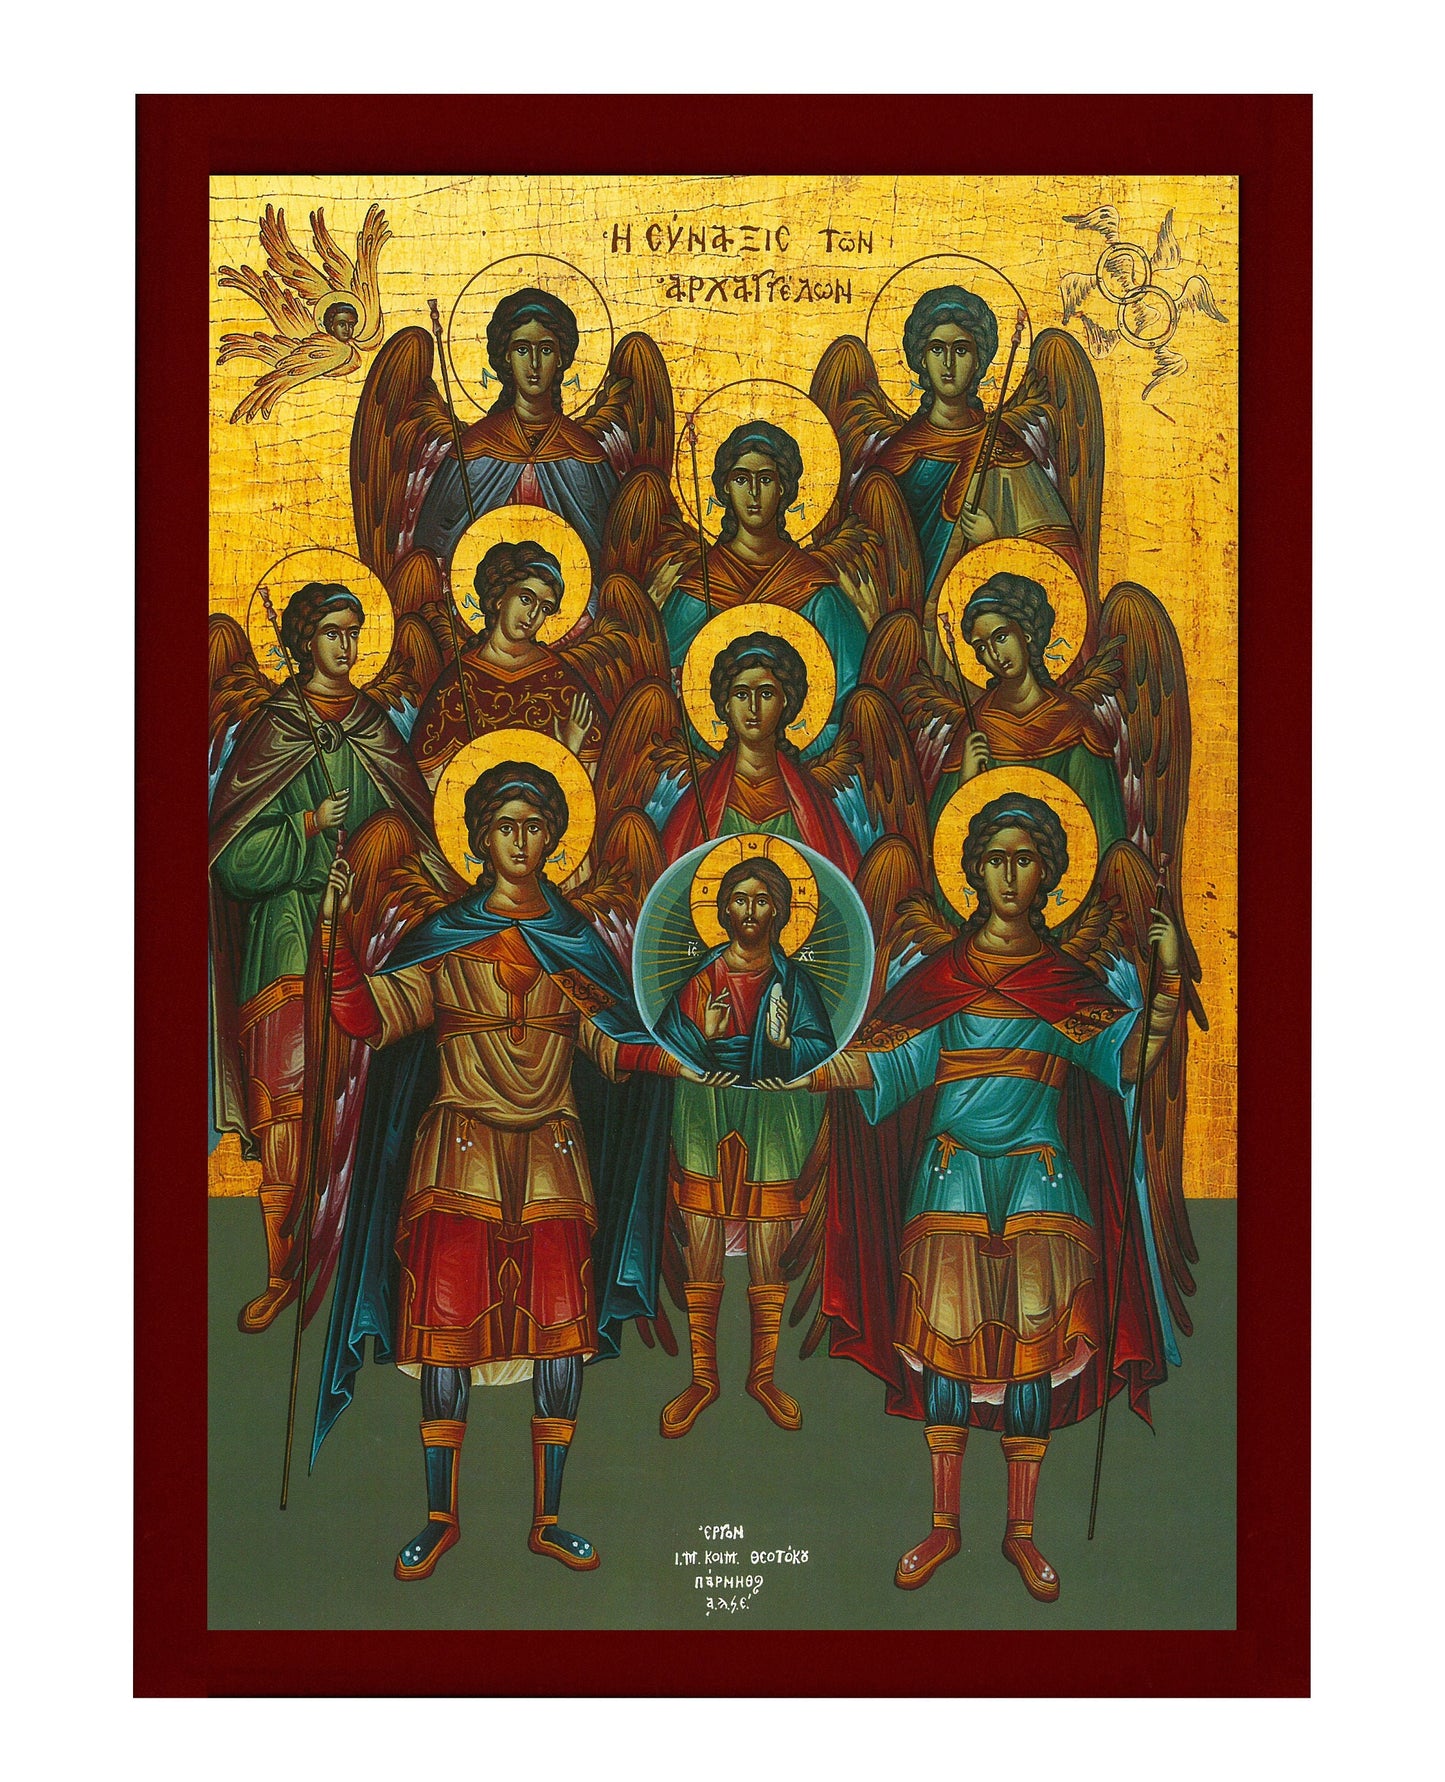 Synaxis of the Archangels icon, Handmade Greek Orthodox Icon of the Gathering of the Archangels, Byzantine art wall hanging wood plaque TheHolyArt